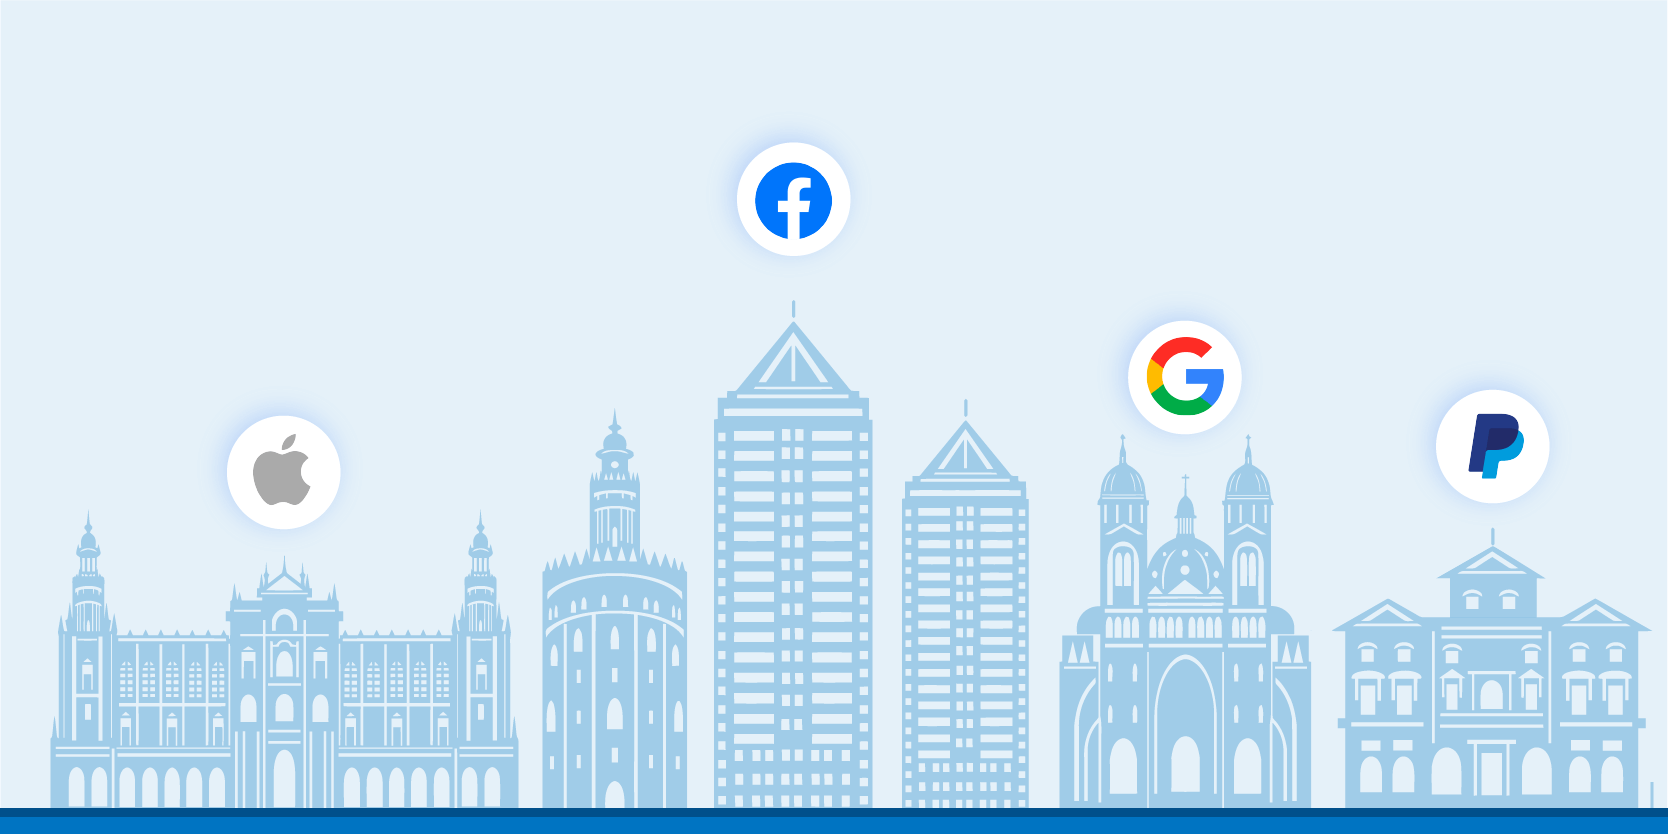 Big tech logos flying over banking institutions